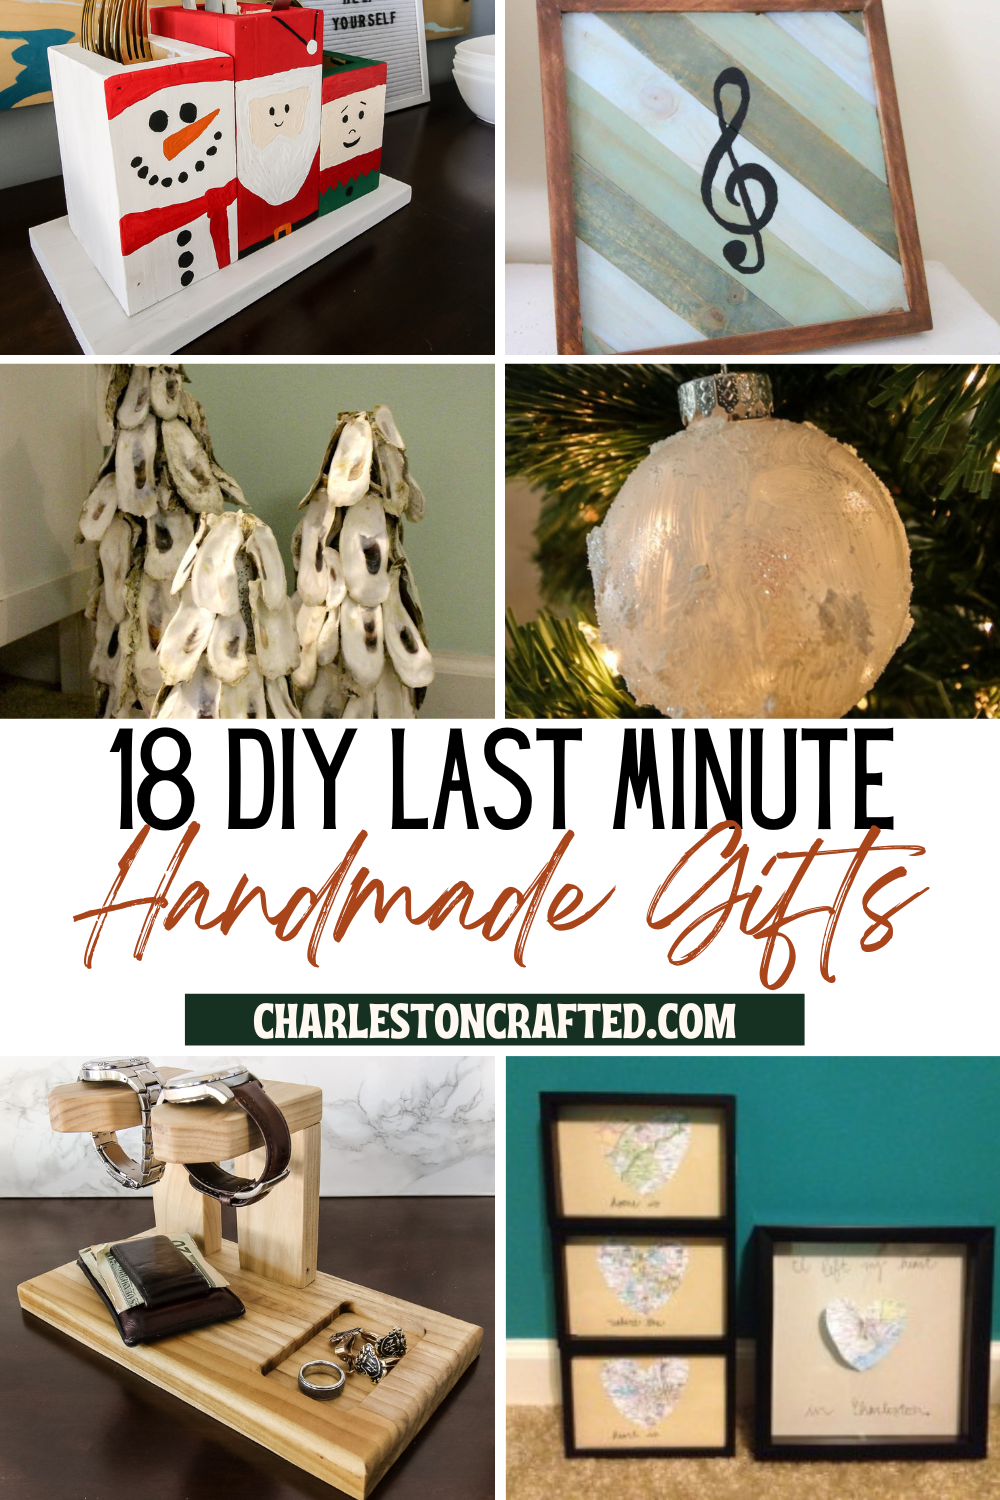 https://www.charlestoncrafted.com/wp-content/uploads/2017/12/diy-last-minute-gift-ideas-pin-images.png